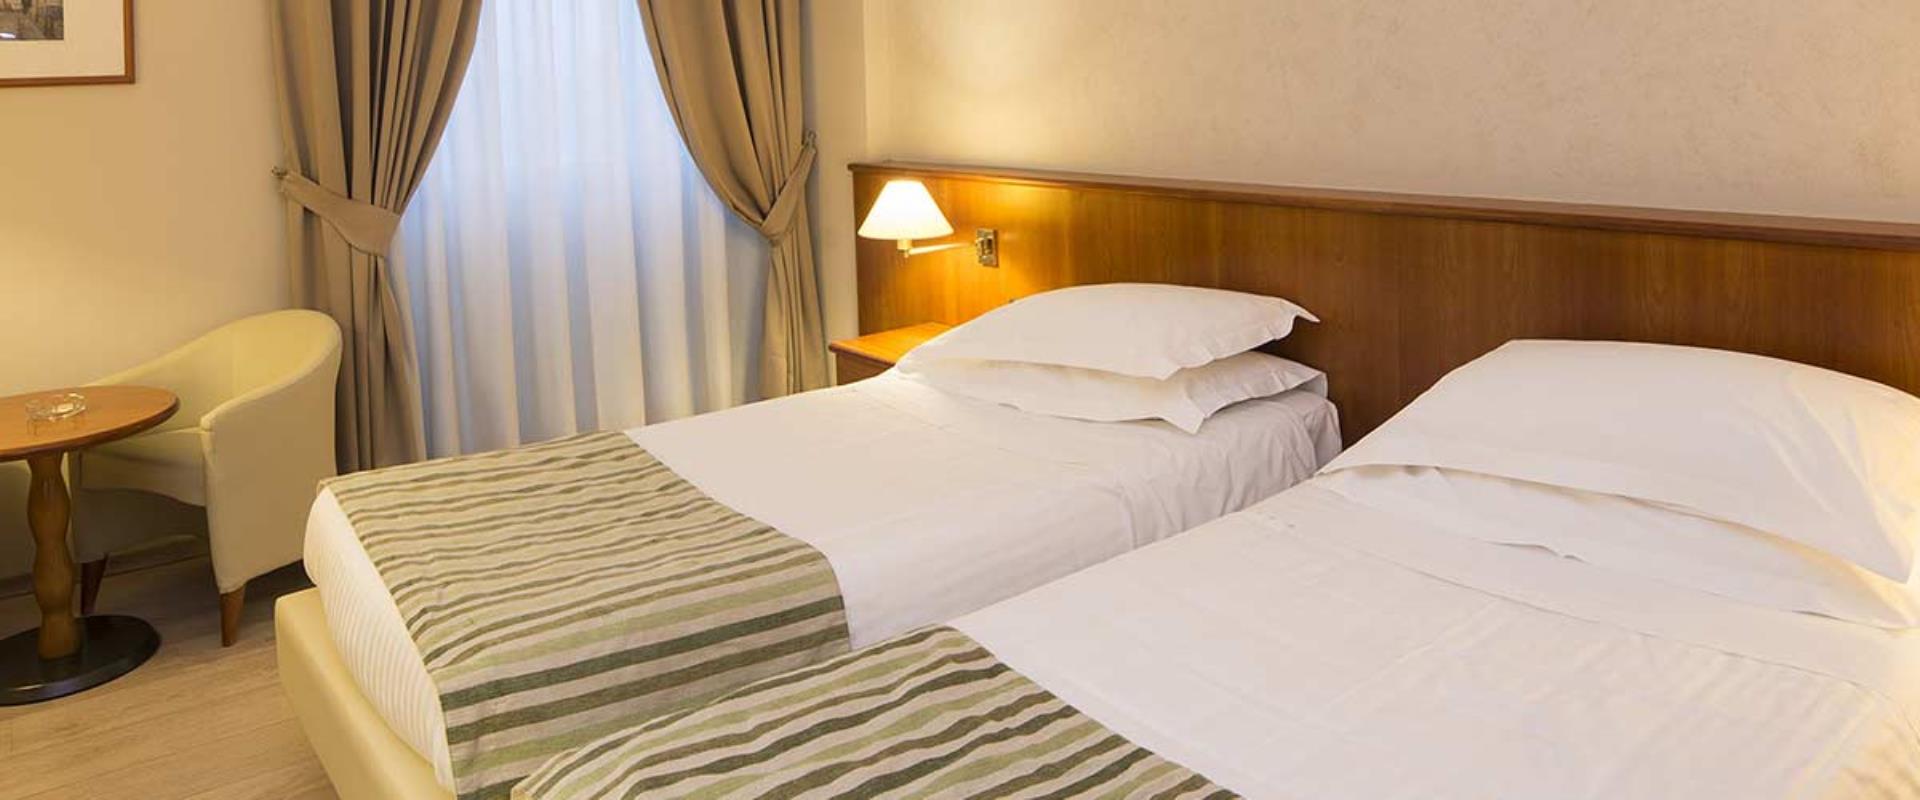  Looking for a hotel for your stay in Piacenza (PC)? Book/reserve at the Best Western Park Hotel